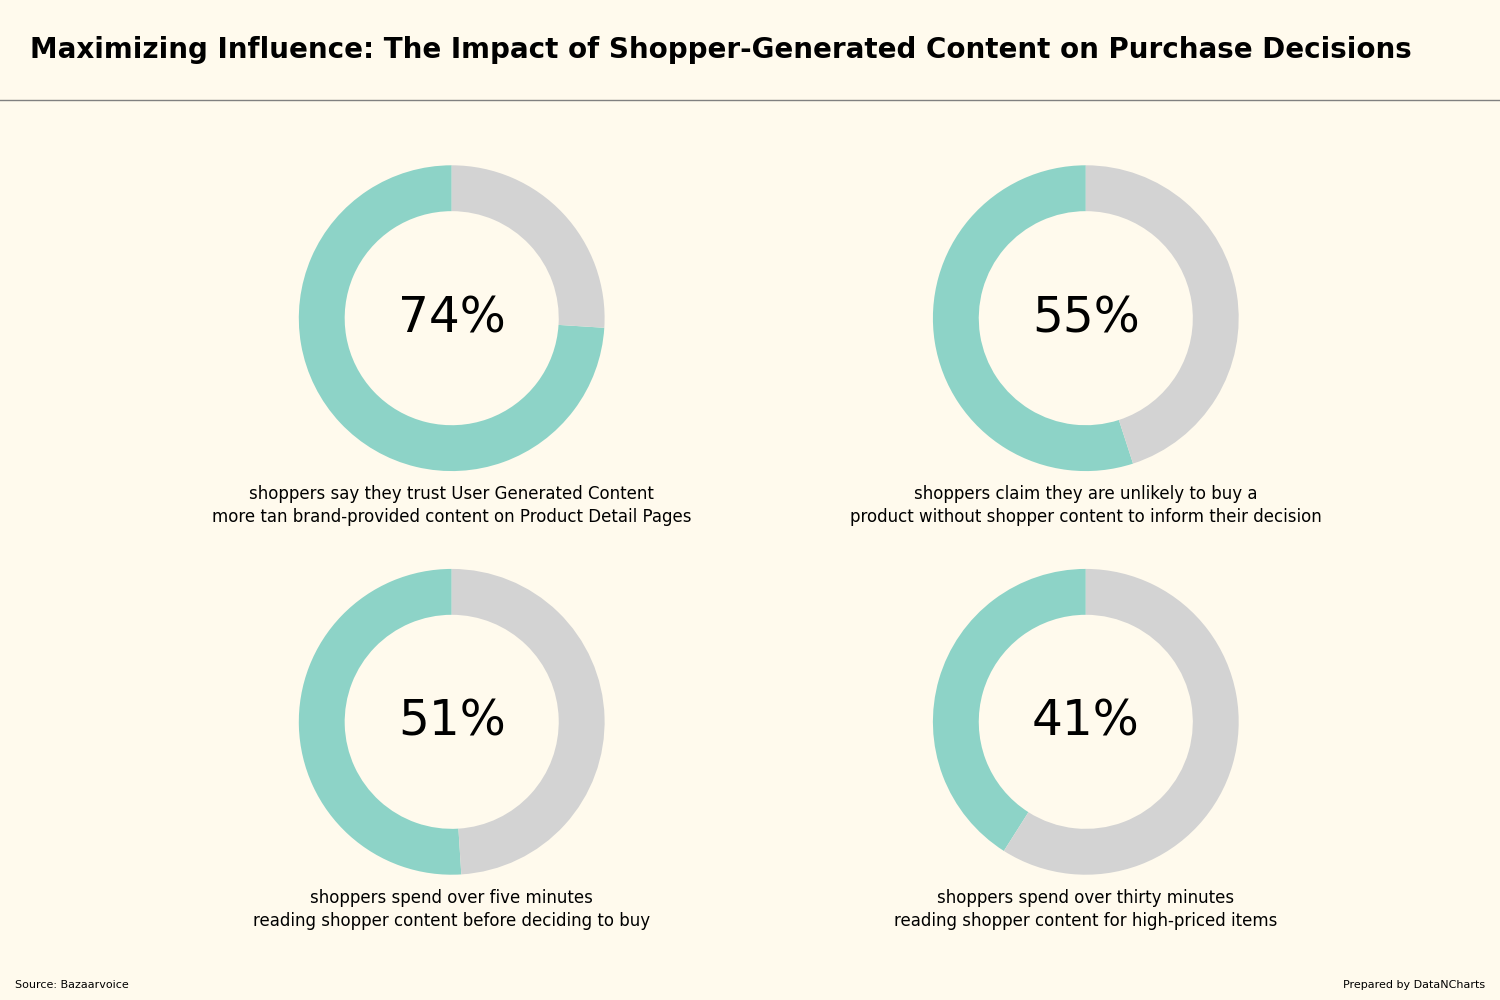 Maximizing Influence The Impact of Shopper-Generated Content on Purchase Decisions